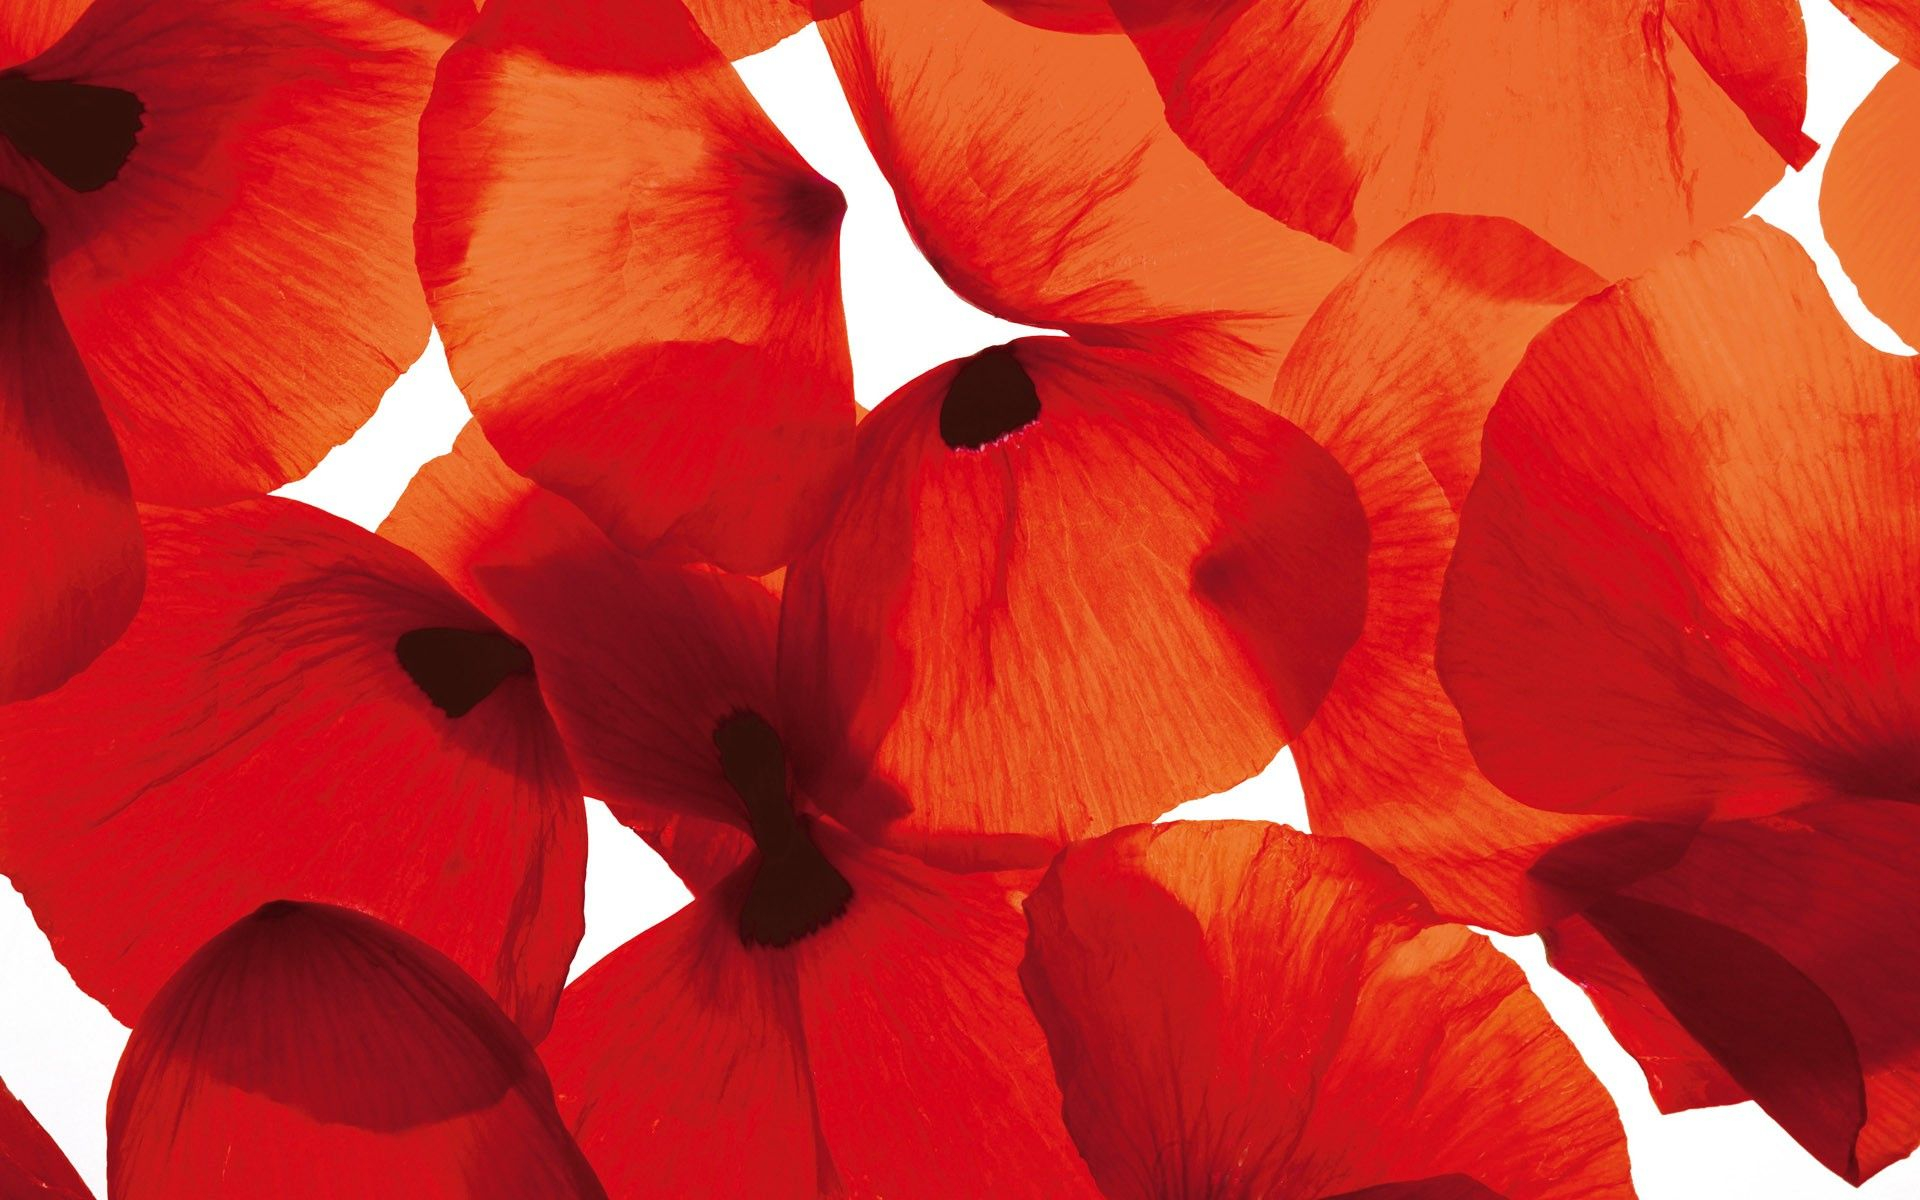 1920x1200 Download Poppy Flowers 14014 px High Resolution Wallpaper | Poppy wallpaper, Poppy flower, Poppies